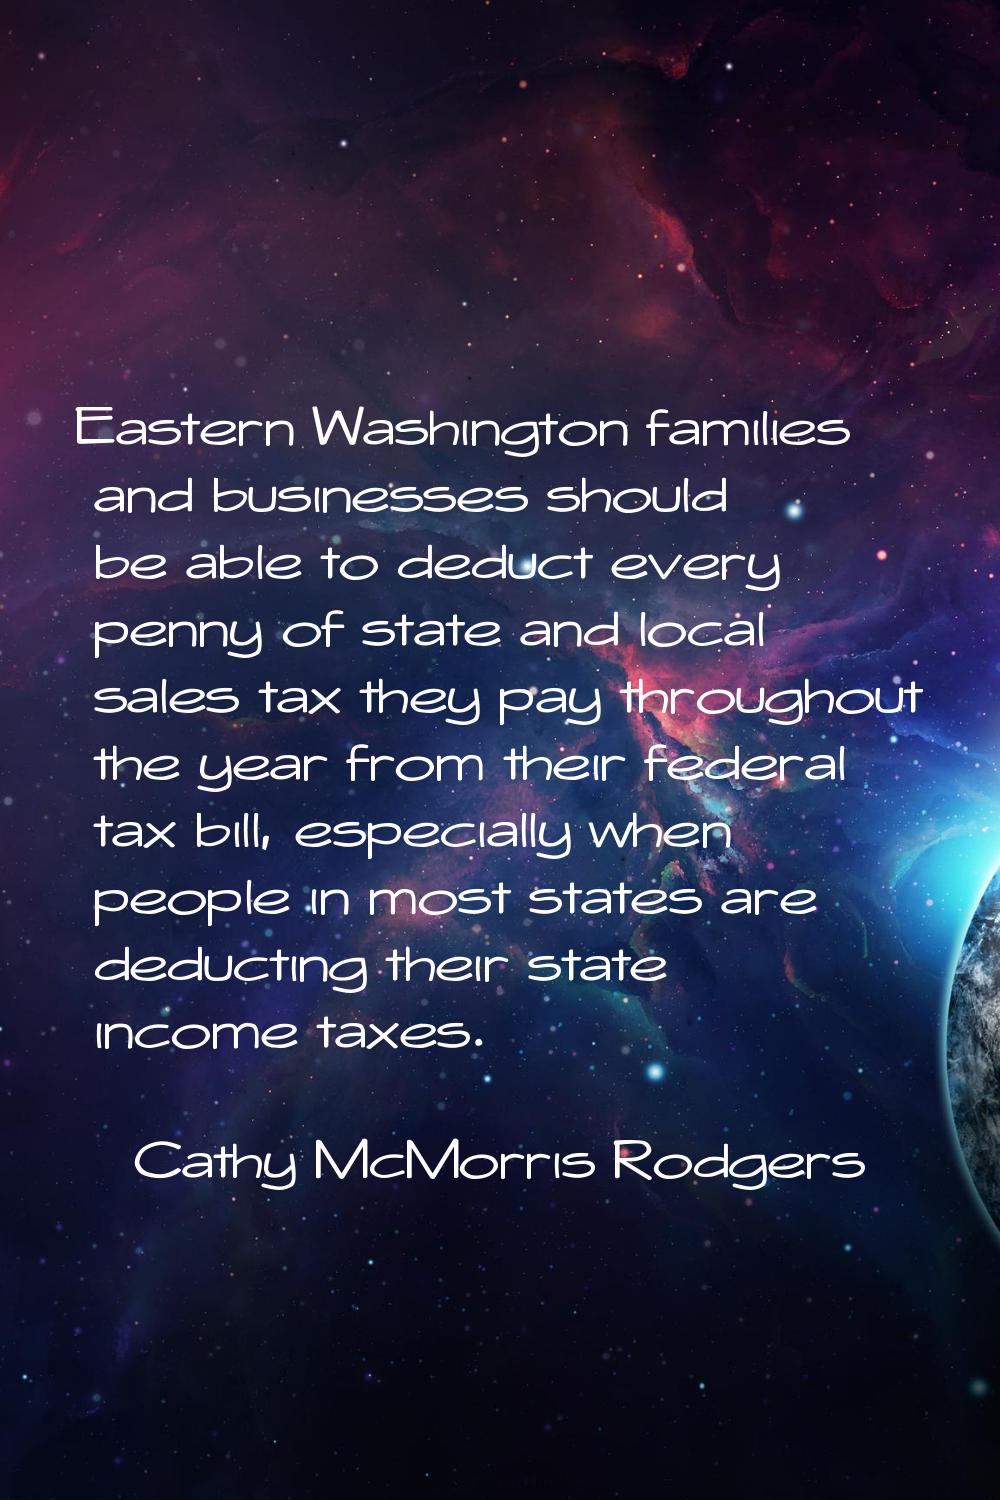 Eastern Washington families and businesses should be able to deduct every penny of state and local 